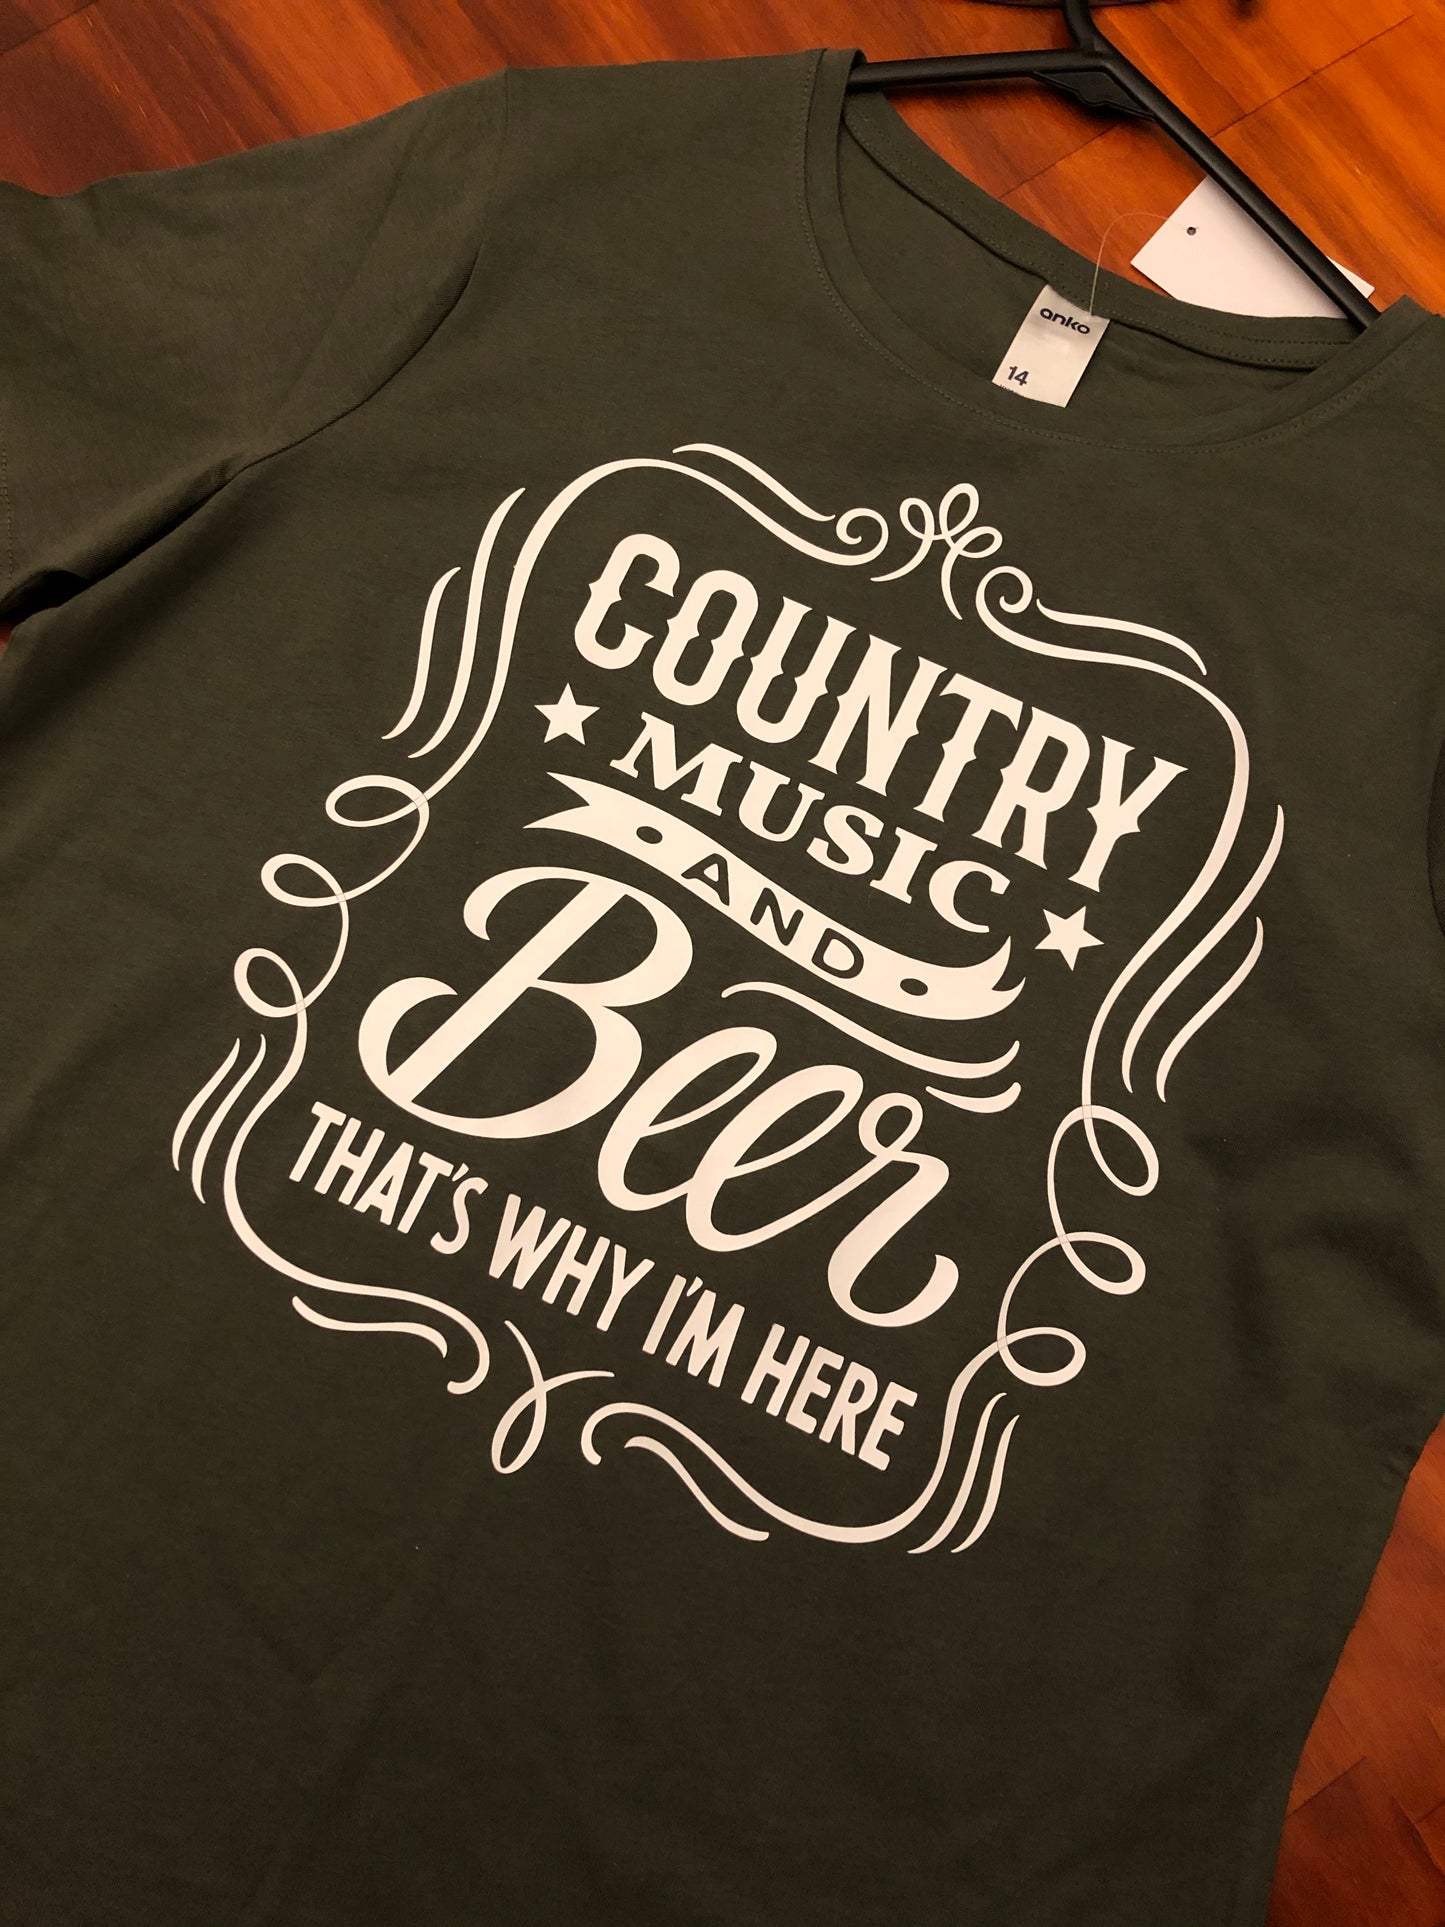 Country shirt - Country music and beer, that's why I'm here.